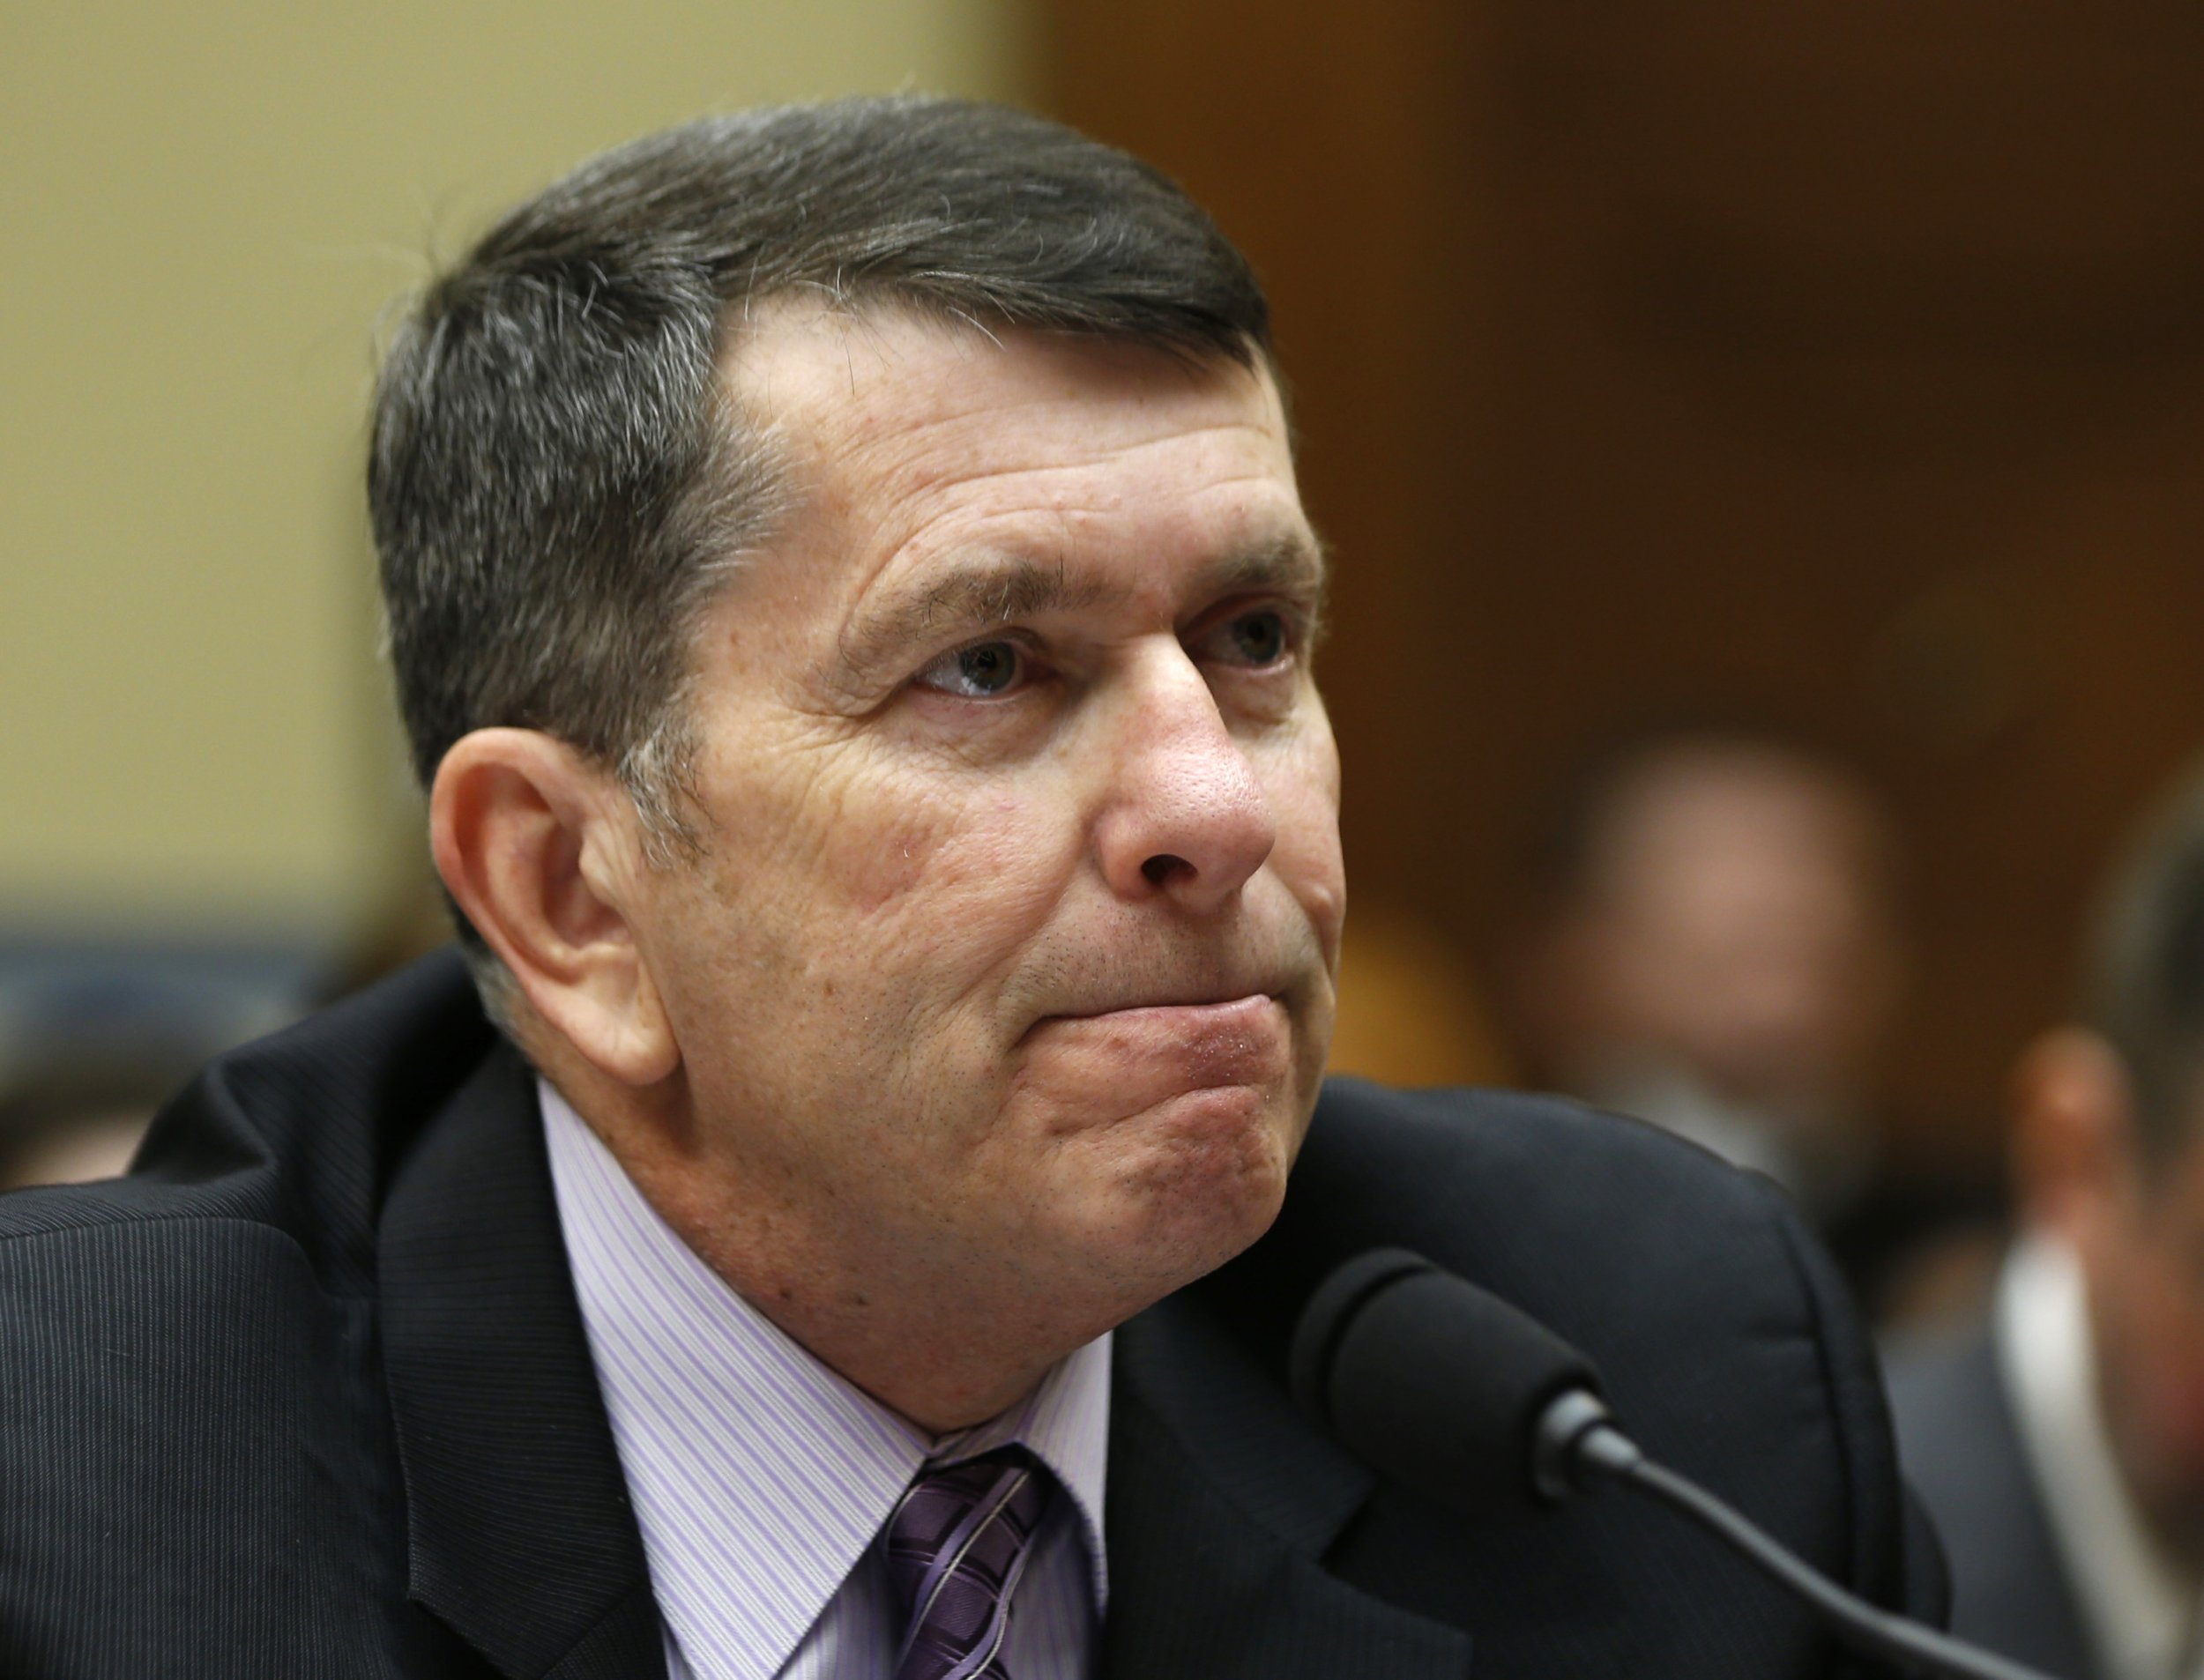 Irs Star Trek Video Top Official Apologizes For Parody Training